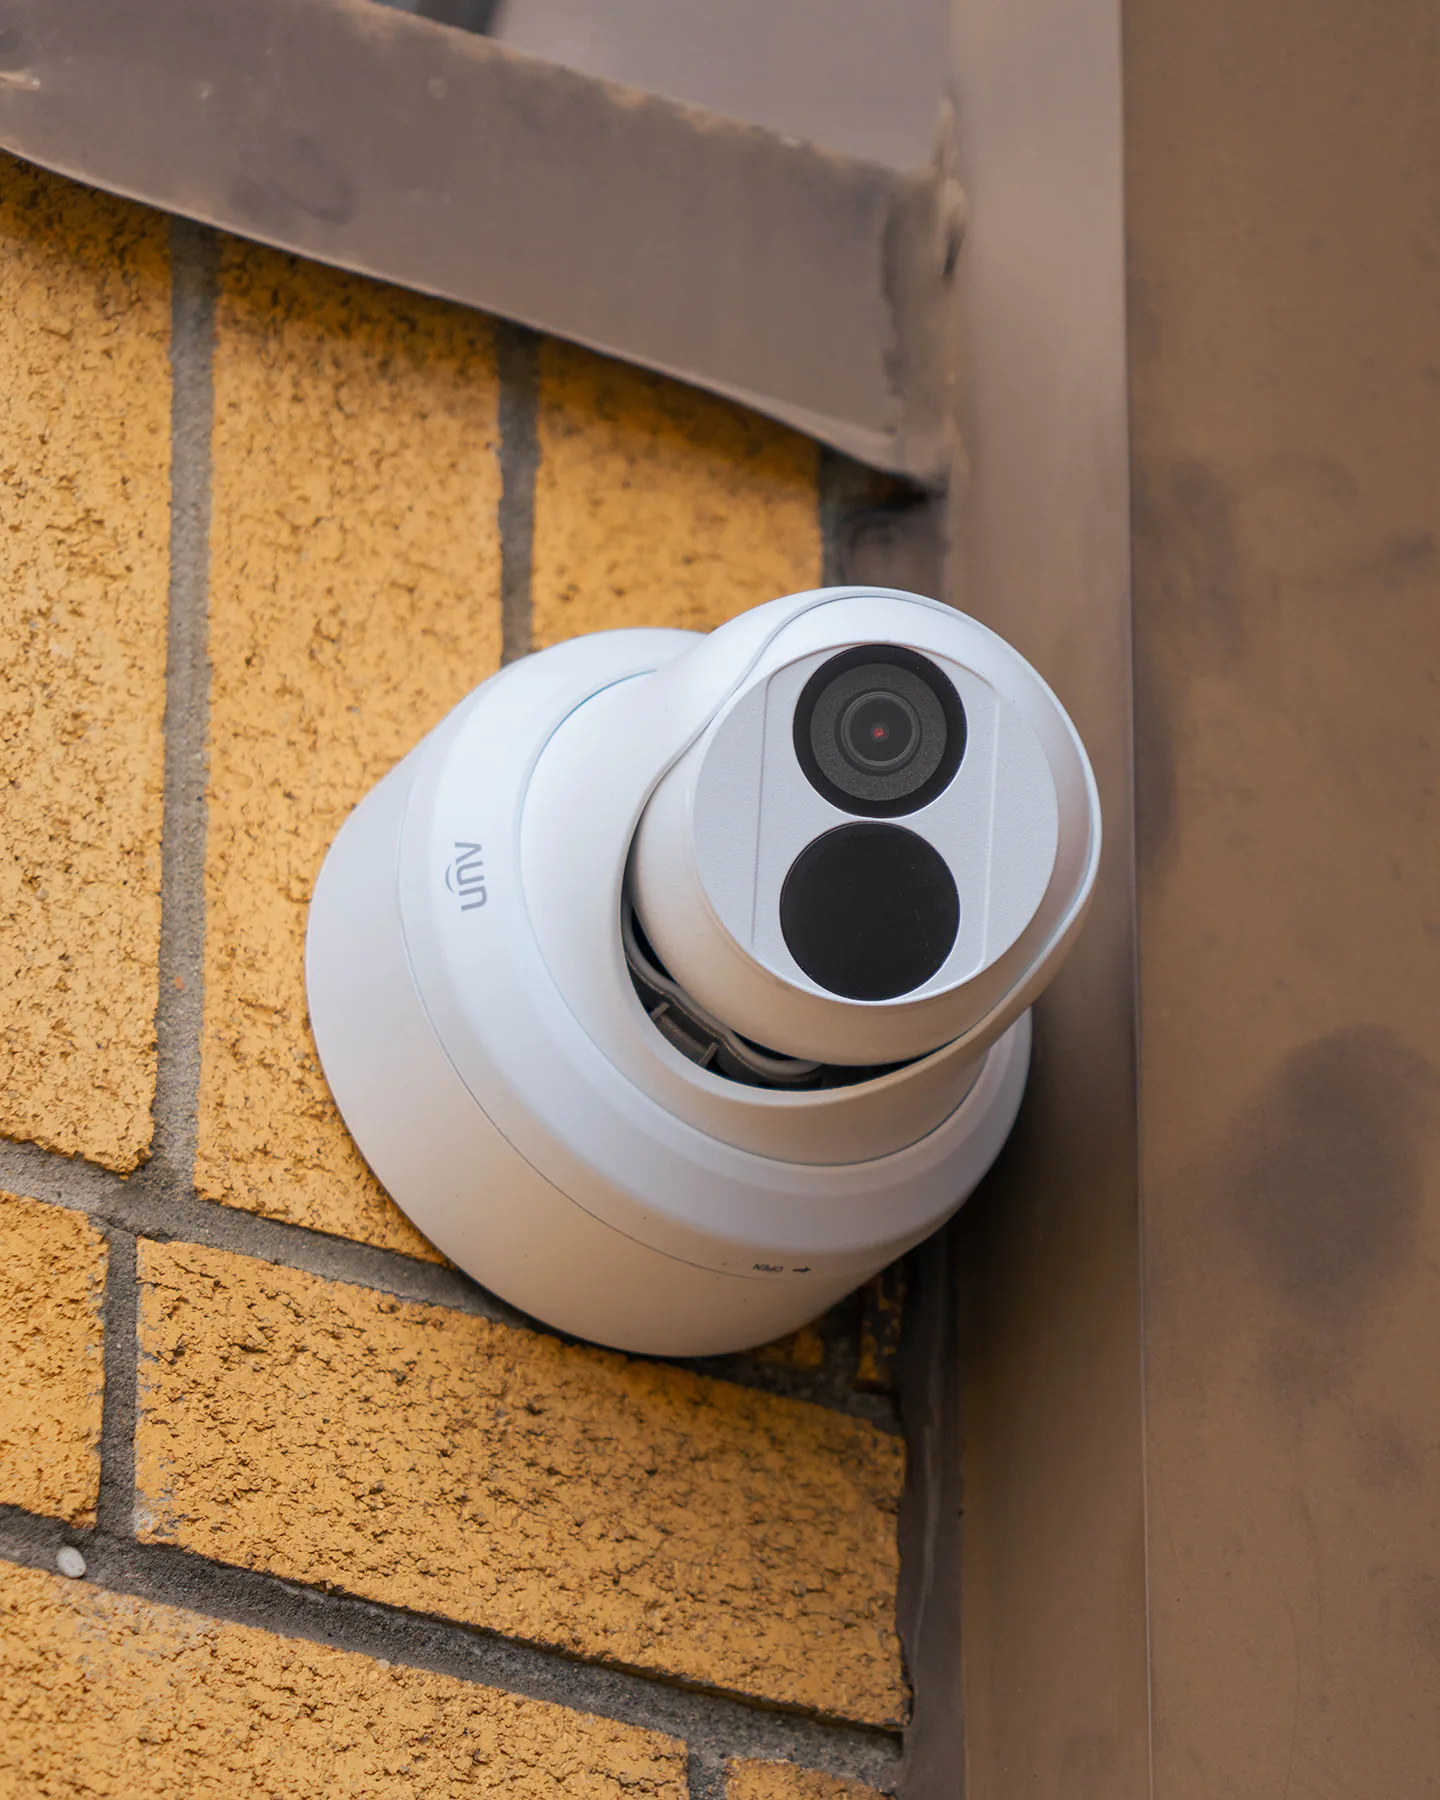 Uniview EC-T4F28M security camera mounted on a brick wall